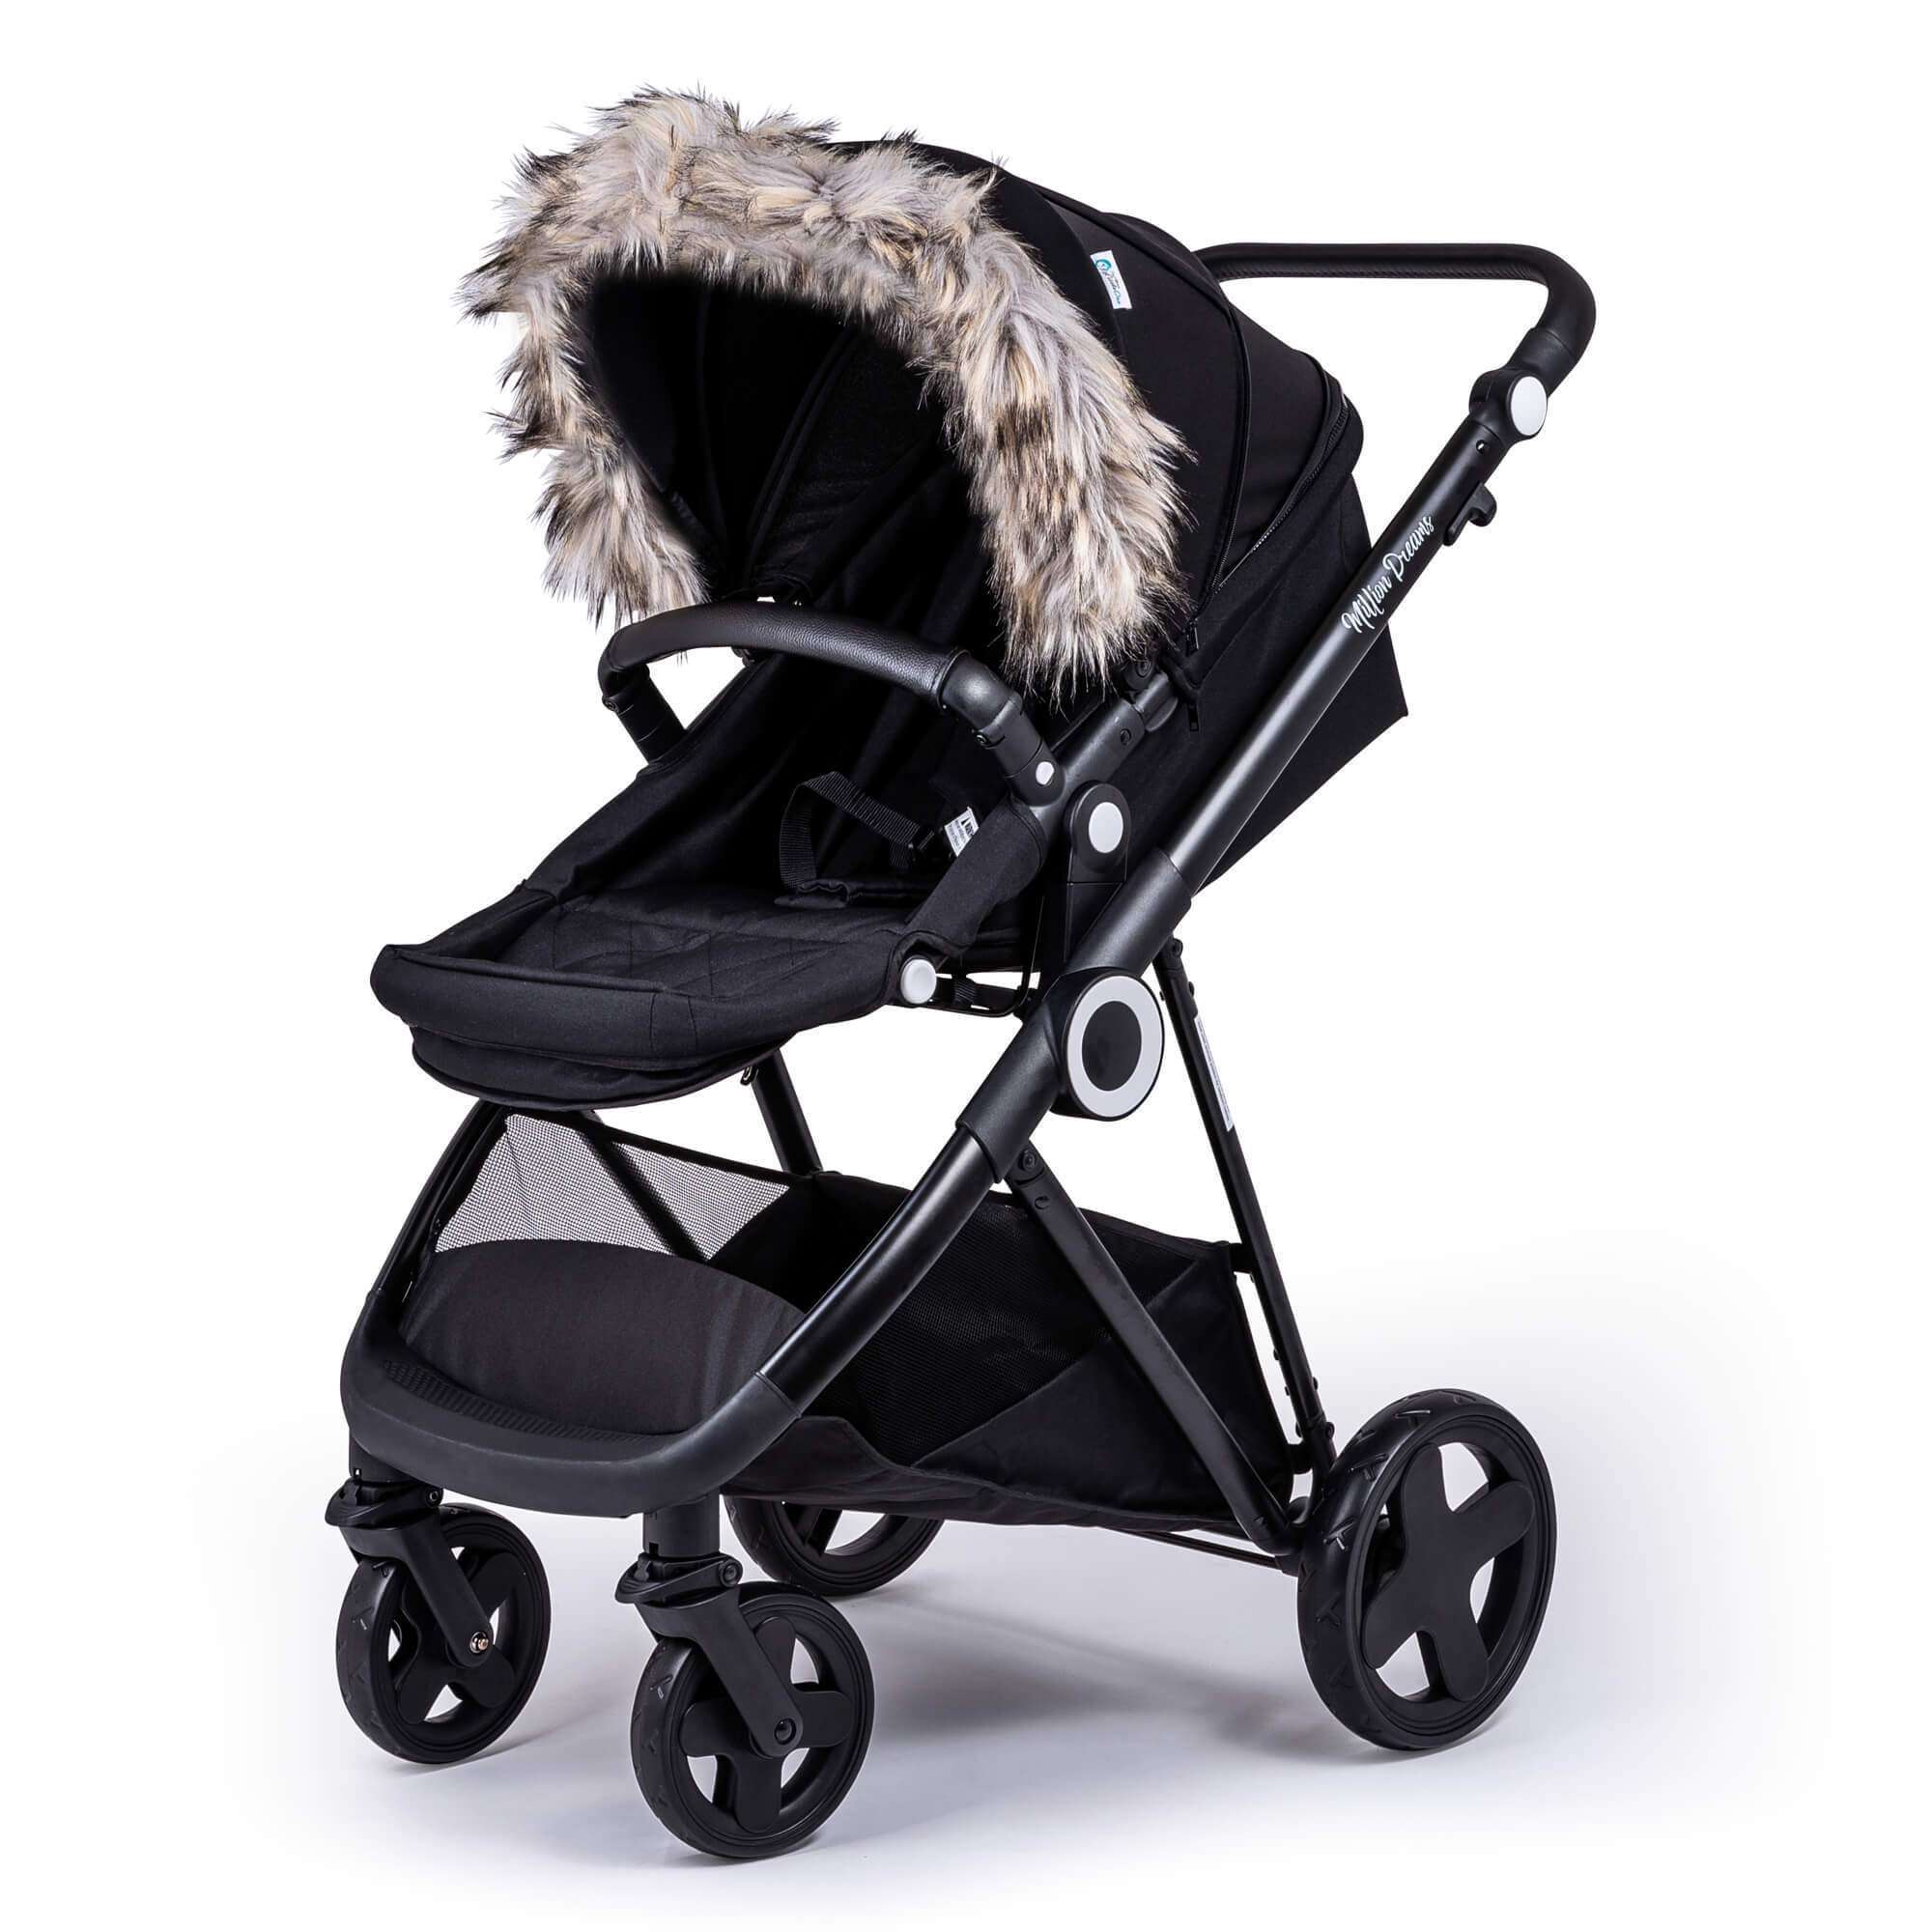 Pram Fur Hood Trim Attachment for Pushchair Compatible with Red Kite - Light Grey / Fits All Models | For Your Little One